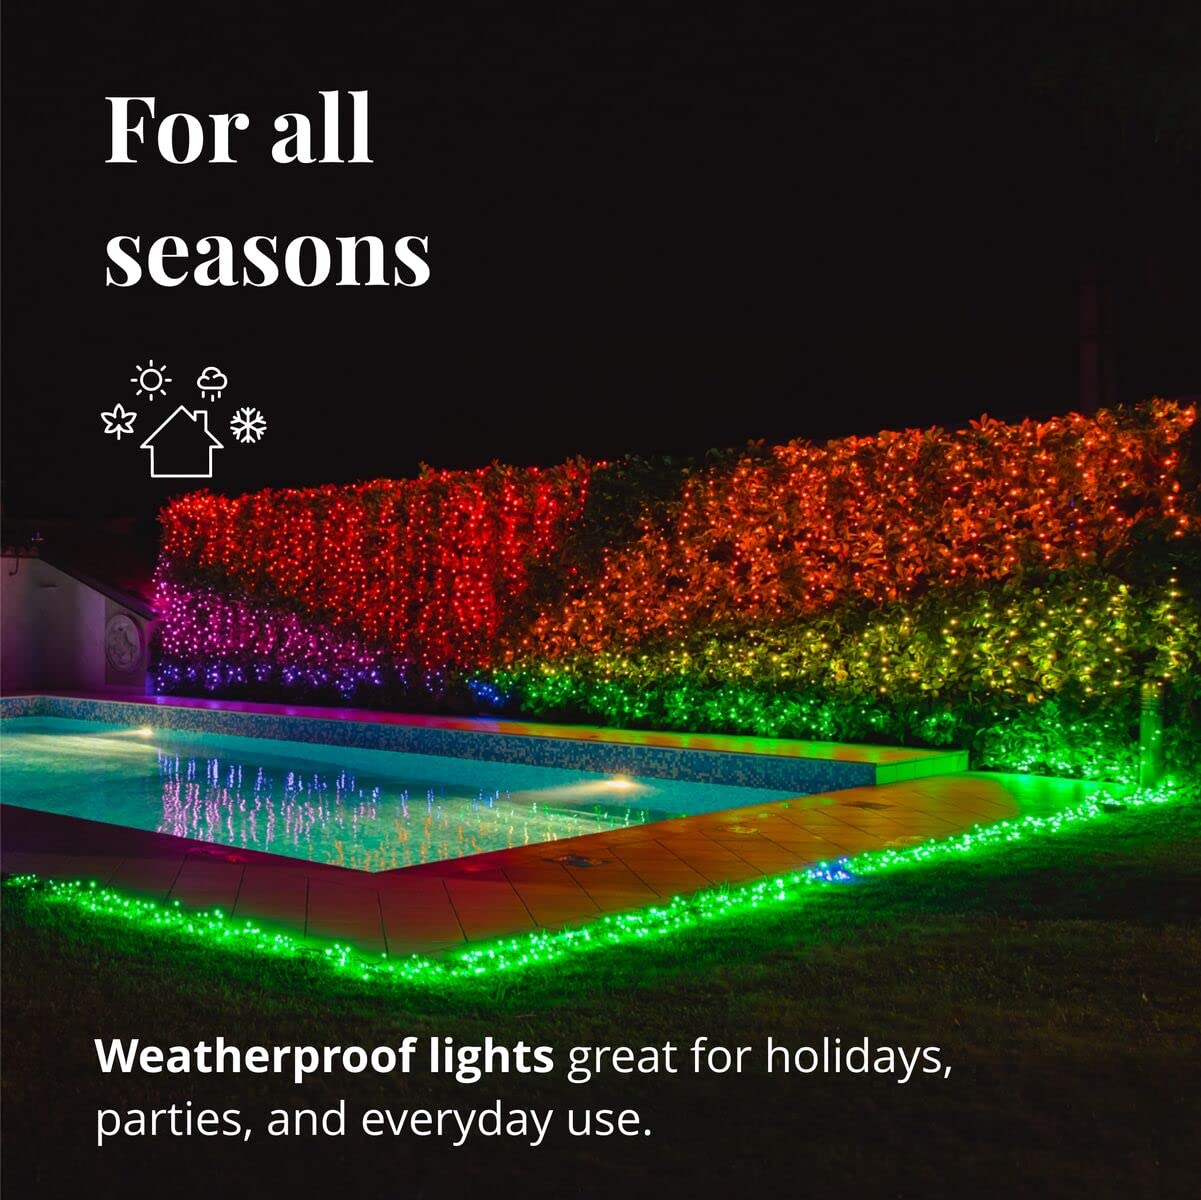 Twinkly Strings – App-Controlled LED Christmas Lights with 400 RGB+W (16 Million Colors + Warm White) LEDs. 105 feet. Green Wire. Indoor and Outdoor Smart Lighting Decoration